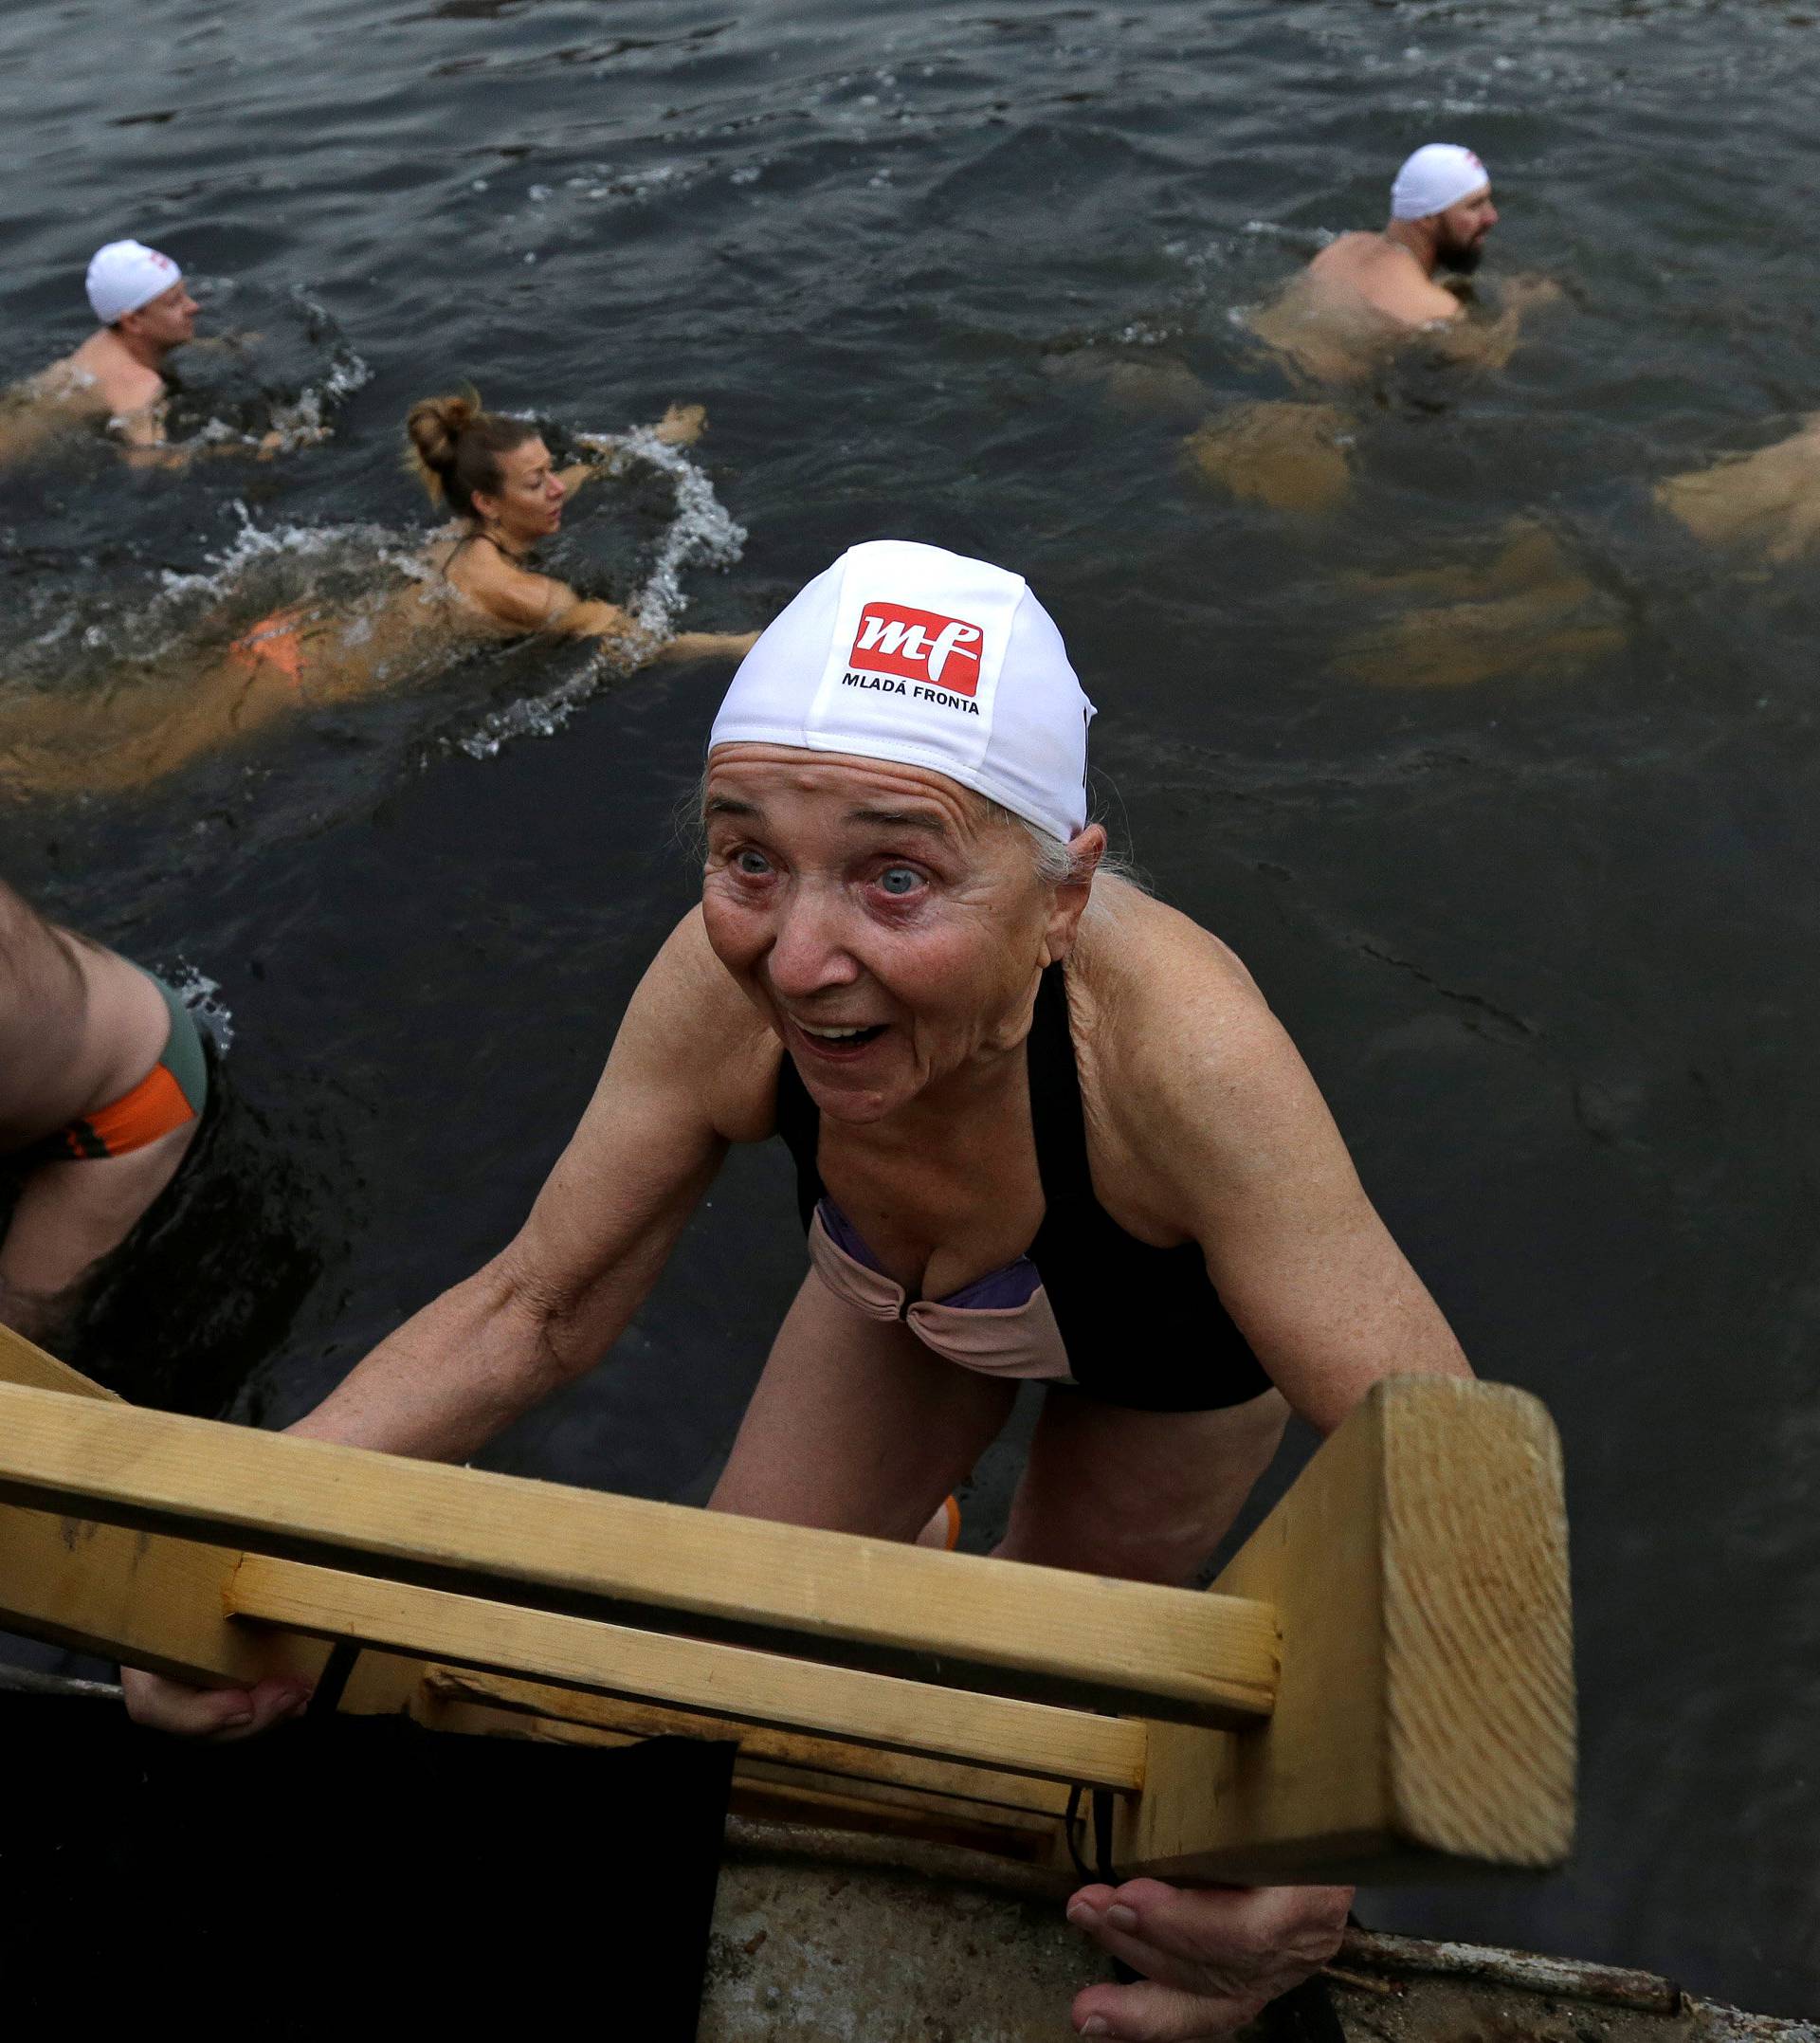 Swimmers participate in the annual Christmas winter swimming competition in the Vltava river in Prague